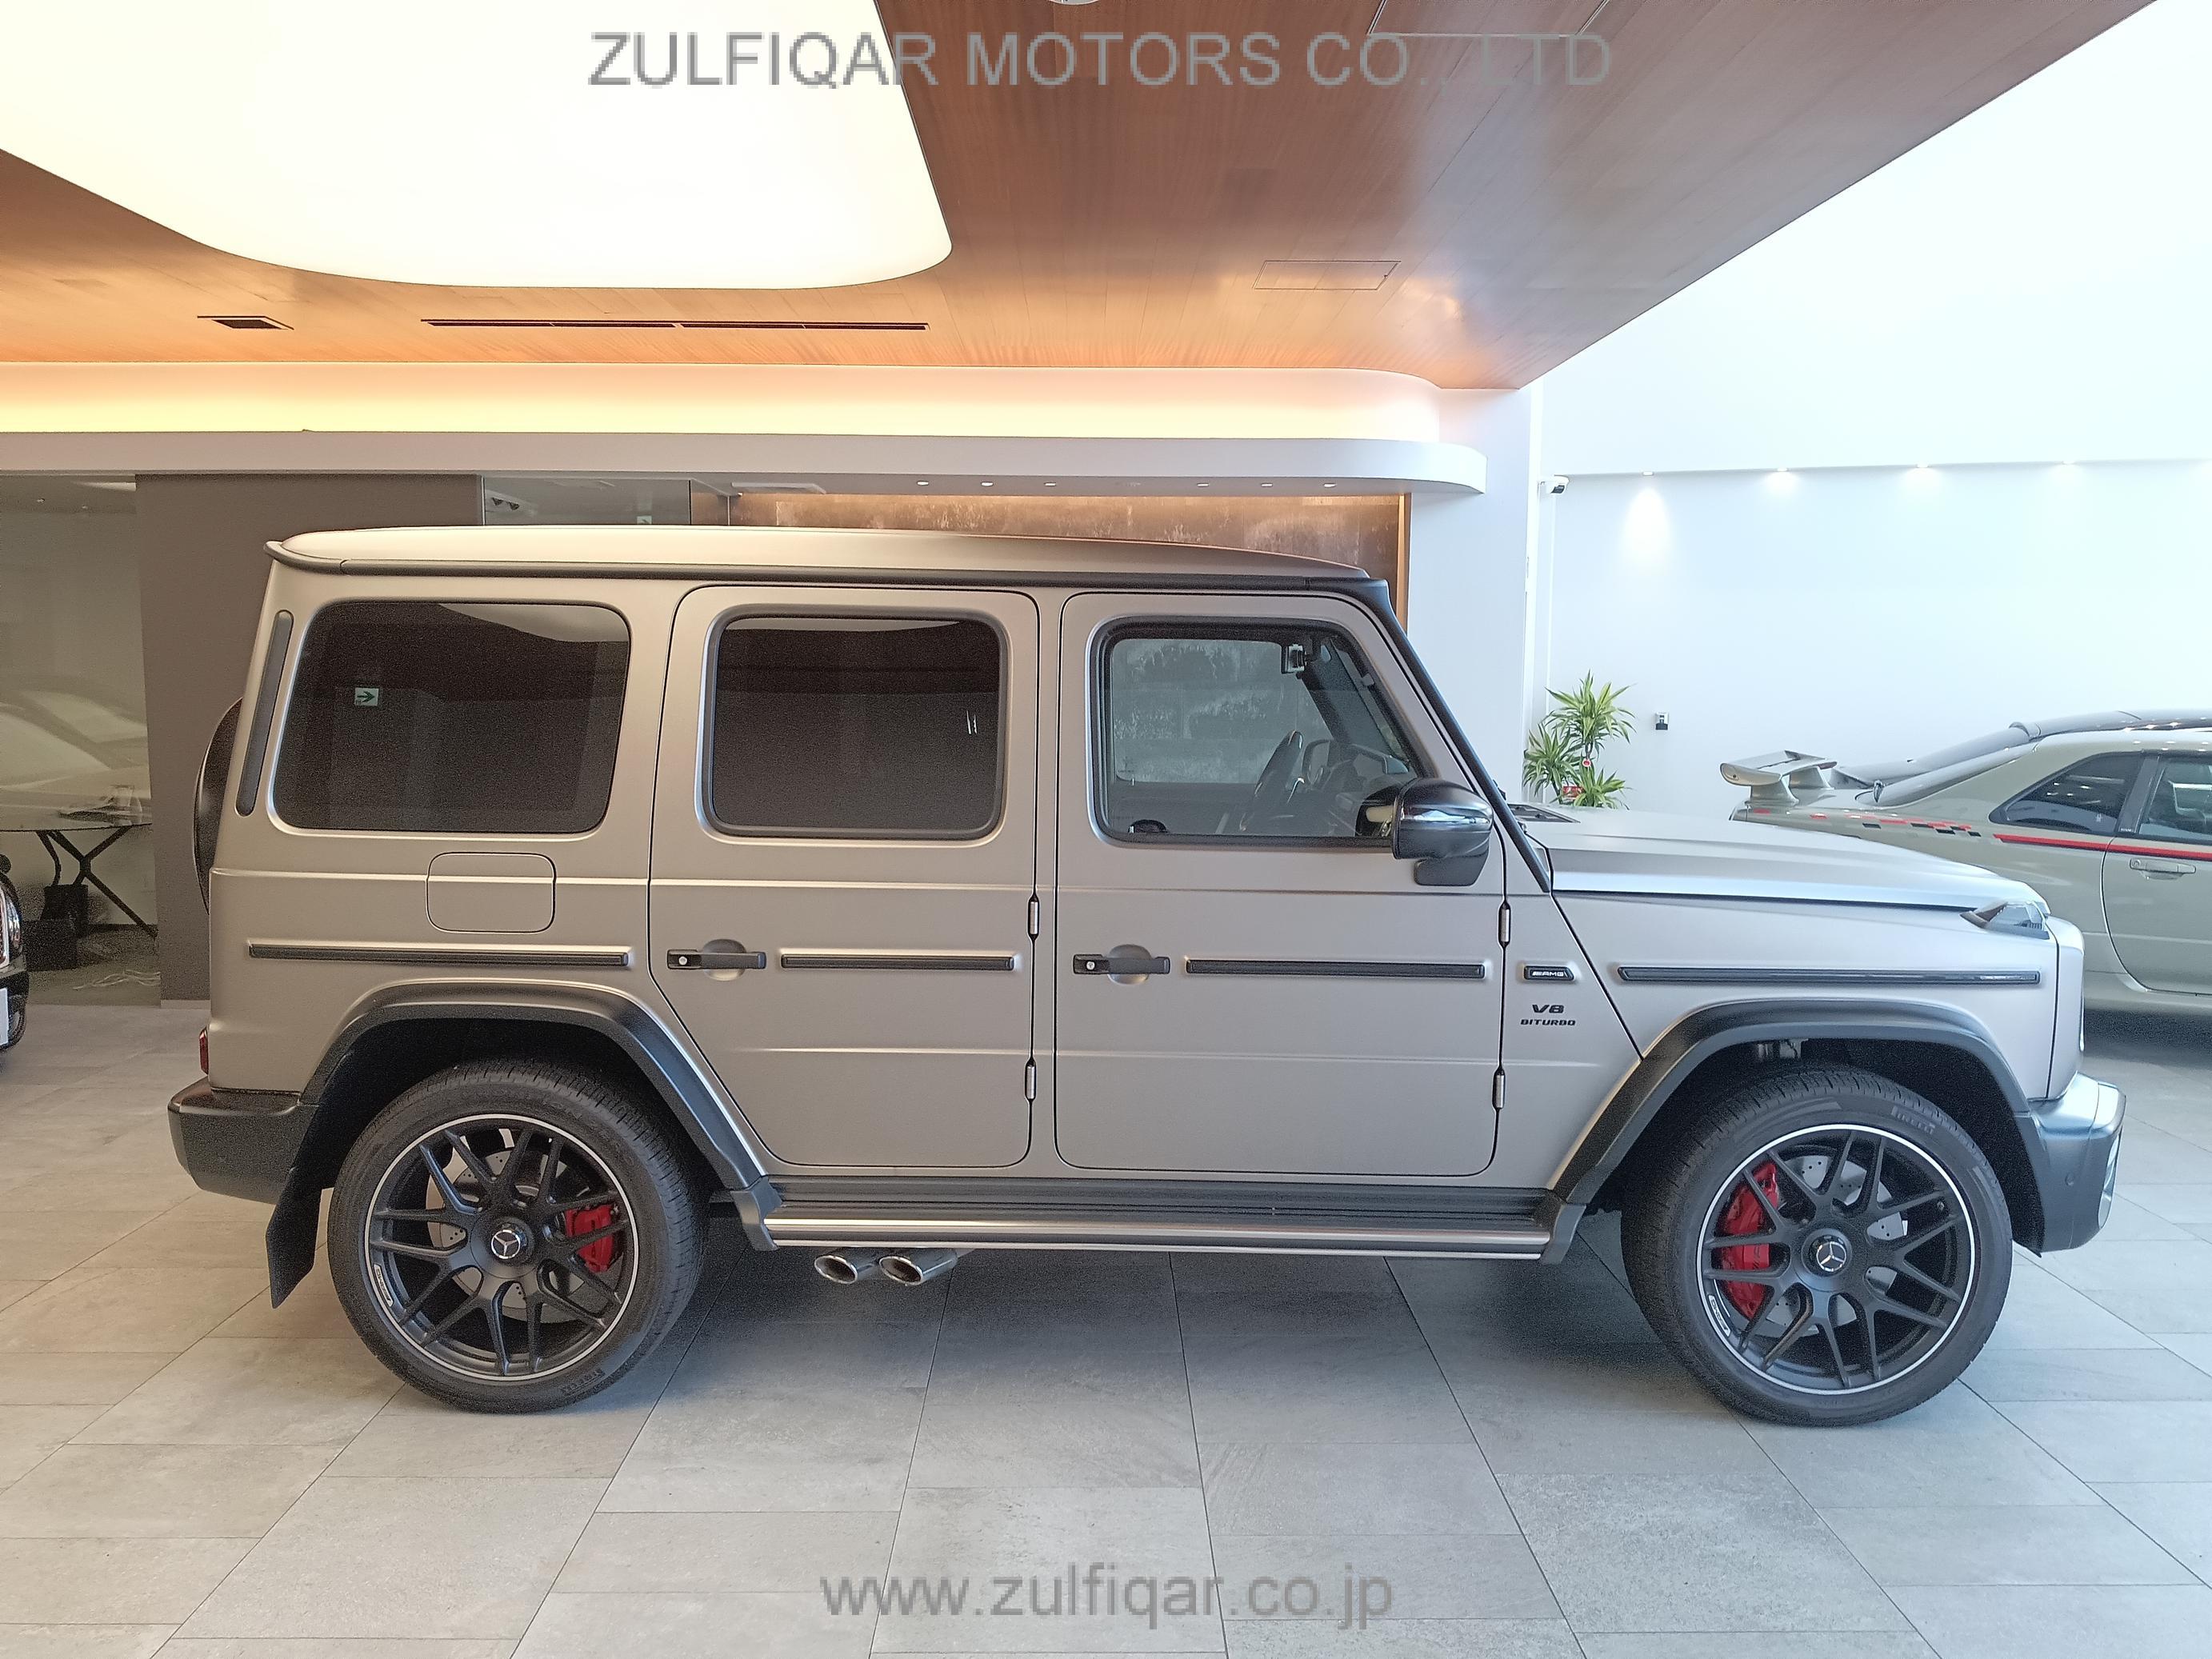 MERCEDES AMG G CLASS 2021 Image 11